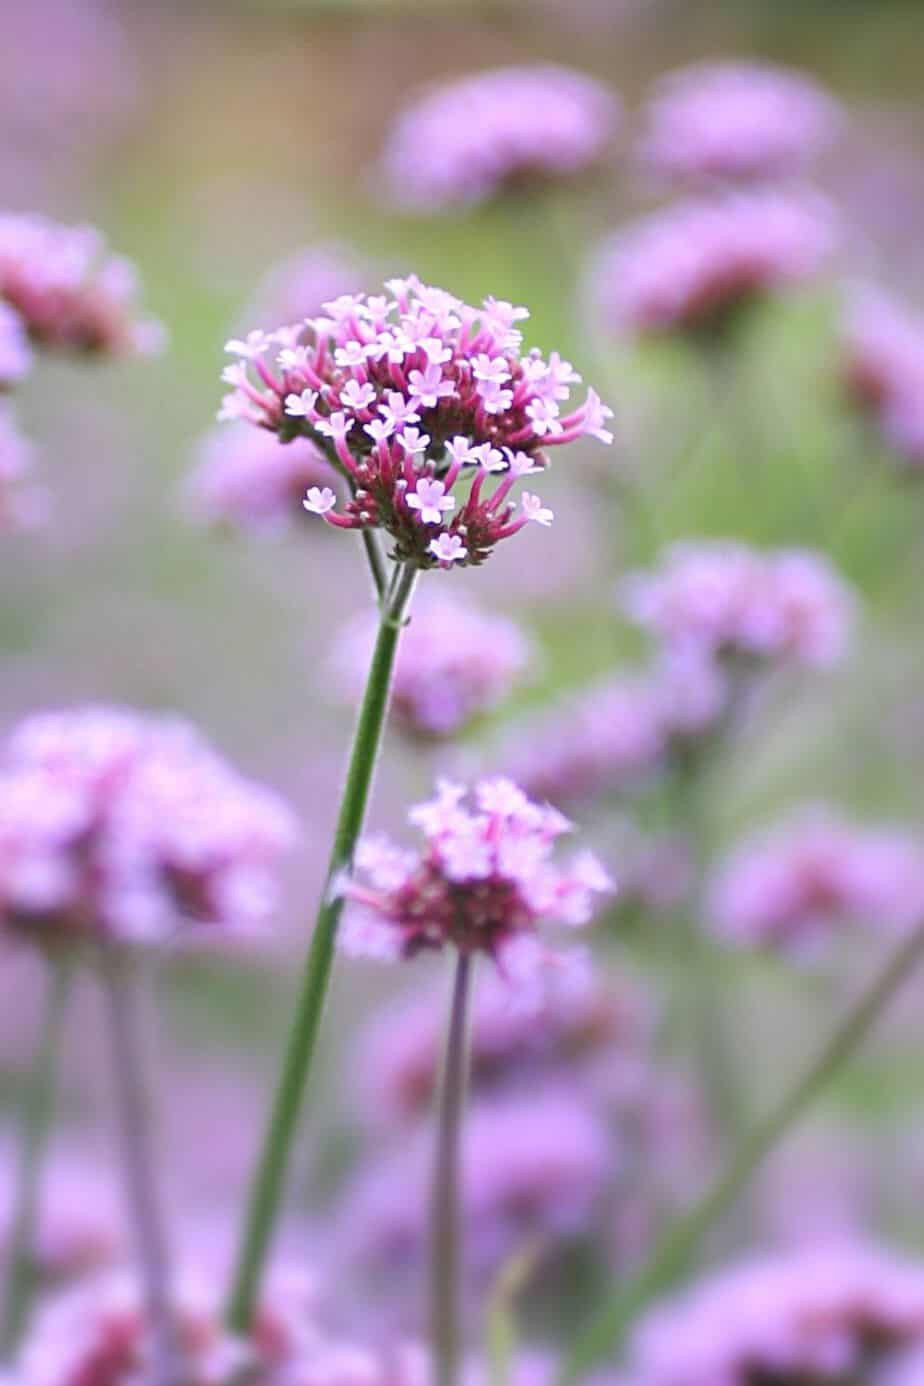 Verbena bonairiensis thrives in northwest-facing gardens as it can tolerate the morning shade and use the afternoon sun to its maximum capacity